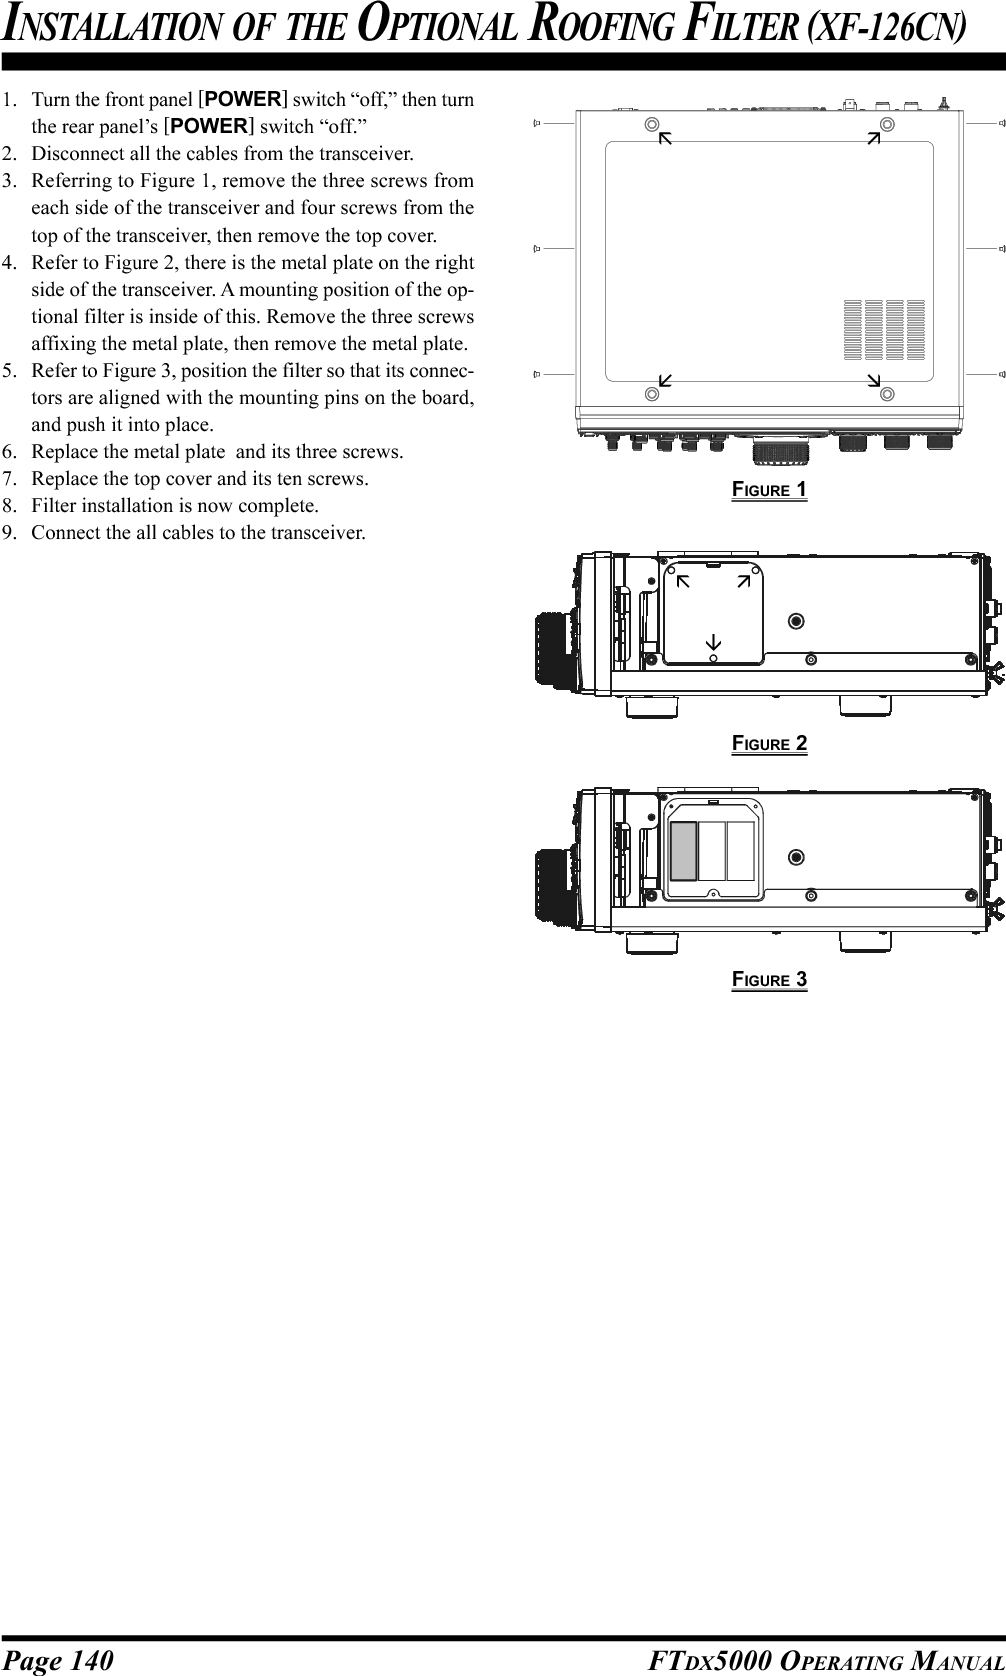 Page 140 FTDX5000 OPERATING MANUALINSTALLATION OF THE OPTIONAL ROOFING FILTER (XF-126CN)1. Turn the front panel [POWER] switch “off,” then turnthe rear panel’s [POWER] switch “off.”2. Disconnect all the cables from the transceiver.3. Referring to Figure 1, remove the three screws fromeach side of the transceiver and four screws from thetop of the transceiver, then remove the top cover.4. Refer to Figure 2, there is the metal plate on the rightside of the transceiver. A mounting position of the op-tional filter is inside of this. Remove the three screwsaffixing the metal plate, then remove the metal plate.5. Refer to Figure 3, position the filter so that its connec-tors are aligned with the mounting pins on the board,and push it into place.6. Replace the metal plate  and its three screws.7. Replace the top cover and its ten screws.8. Filter installation is now complete.9. Connect the all cables to the transceiver.FIGURE 1FIGURE 2FIGURE 3